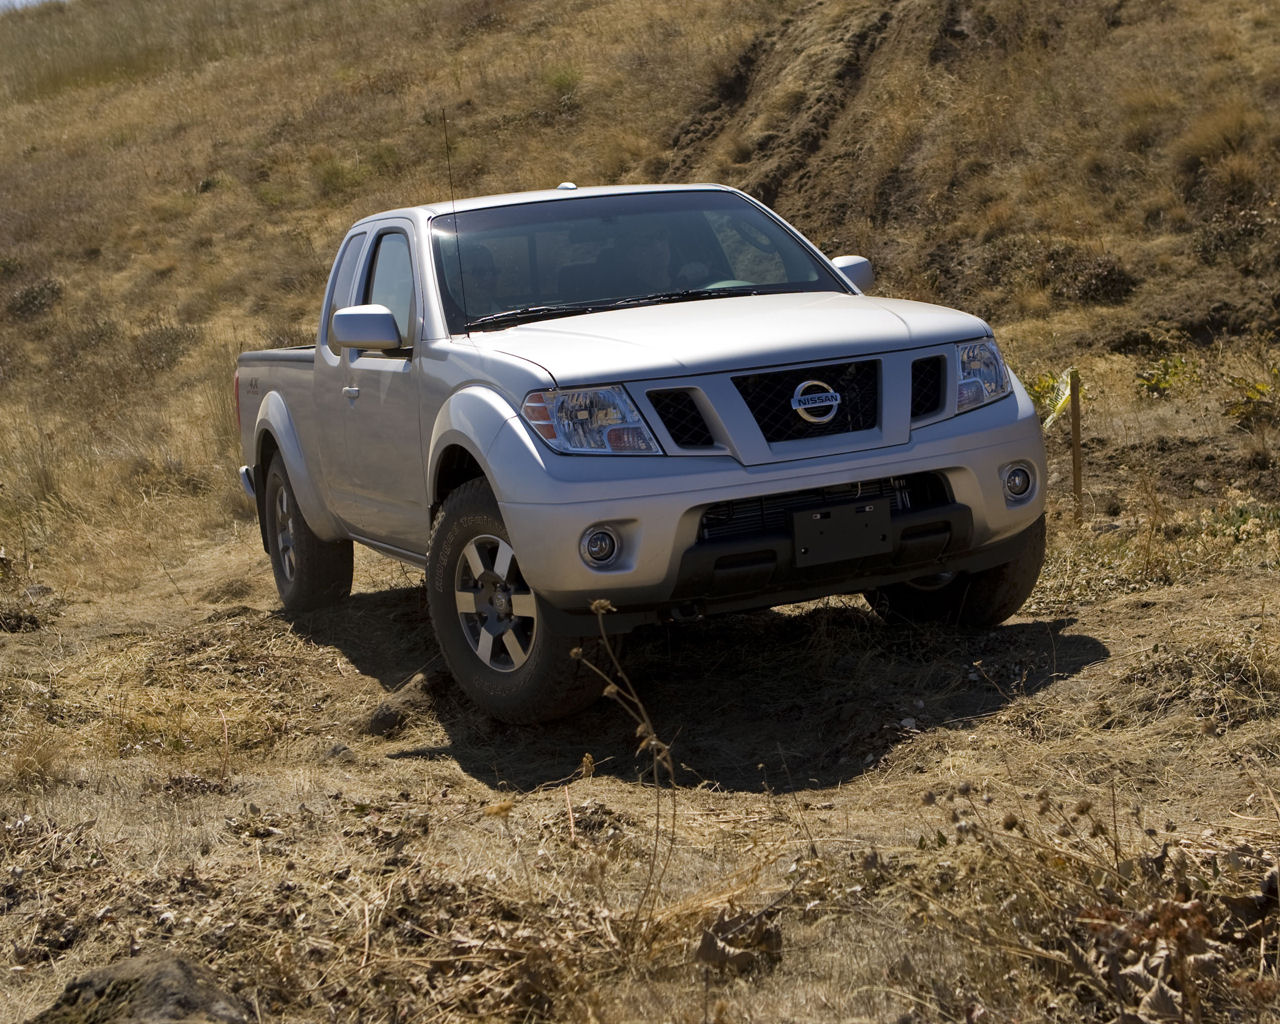 On The Nissan Frontier Wallpaper Below And Choose Set As Background